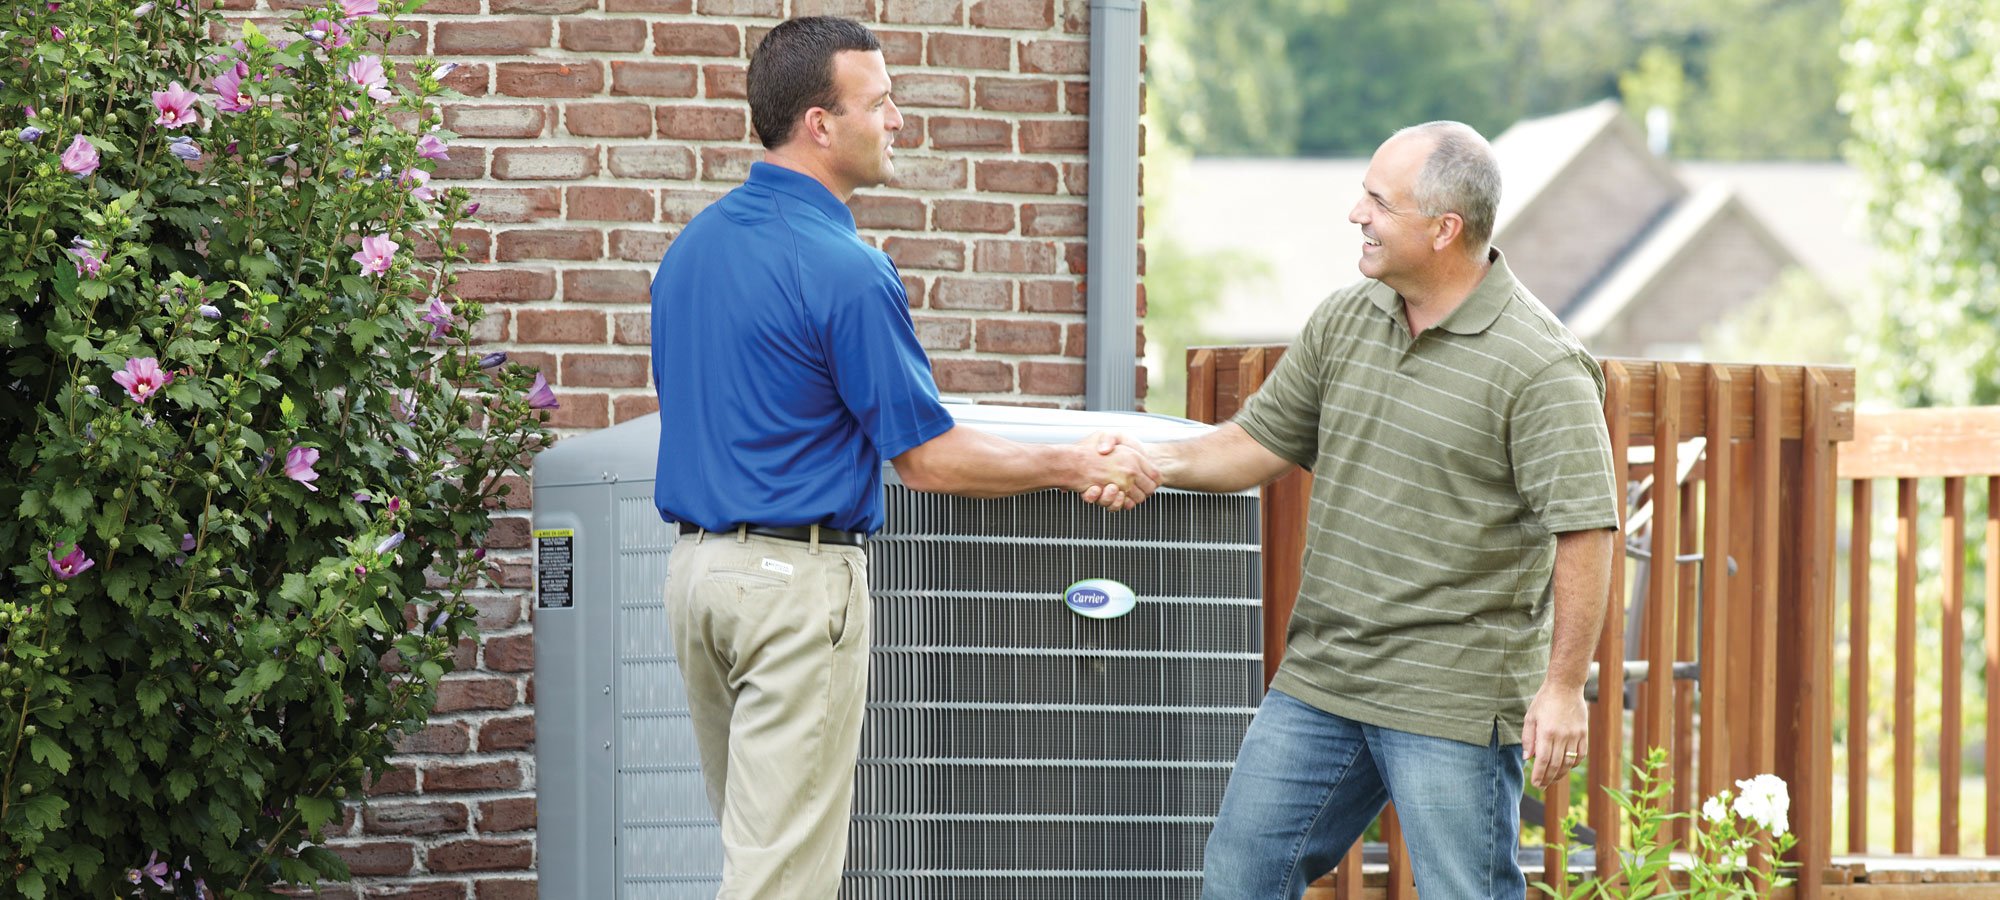 Carrier heating and air conditioning Philadelphia